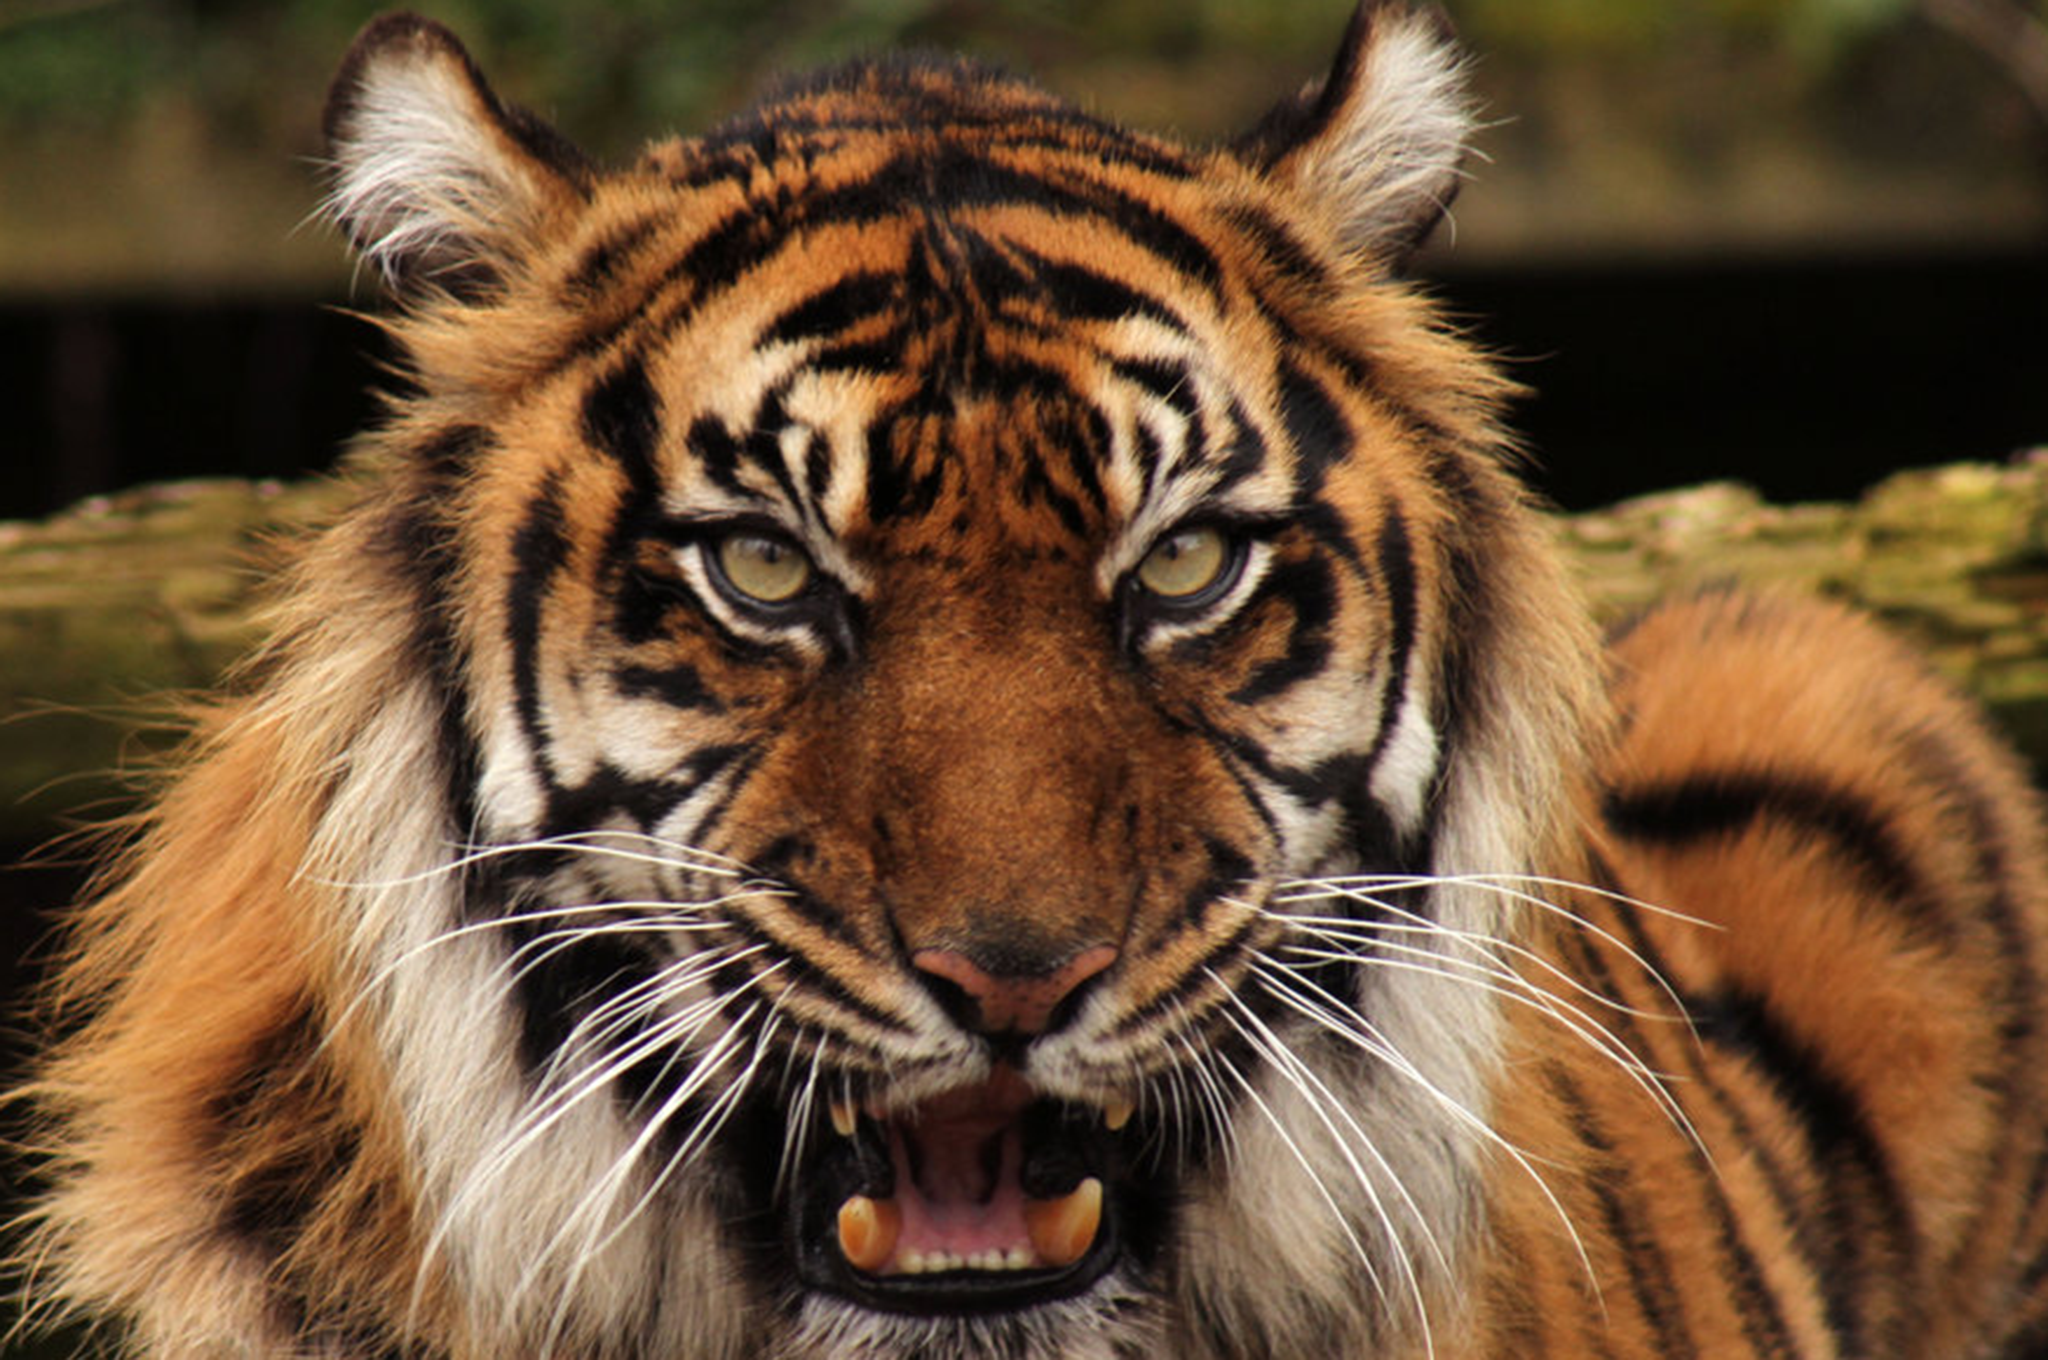 Sarah McClay was attacked by the tiger at the South Lakes Wild Animal Park in Dalton-in-Furness